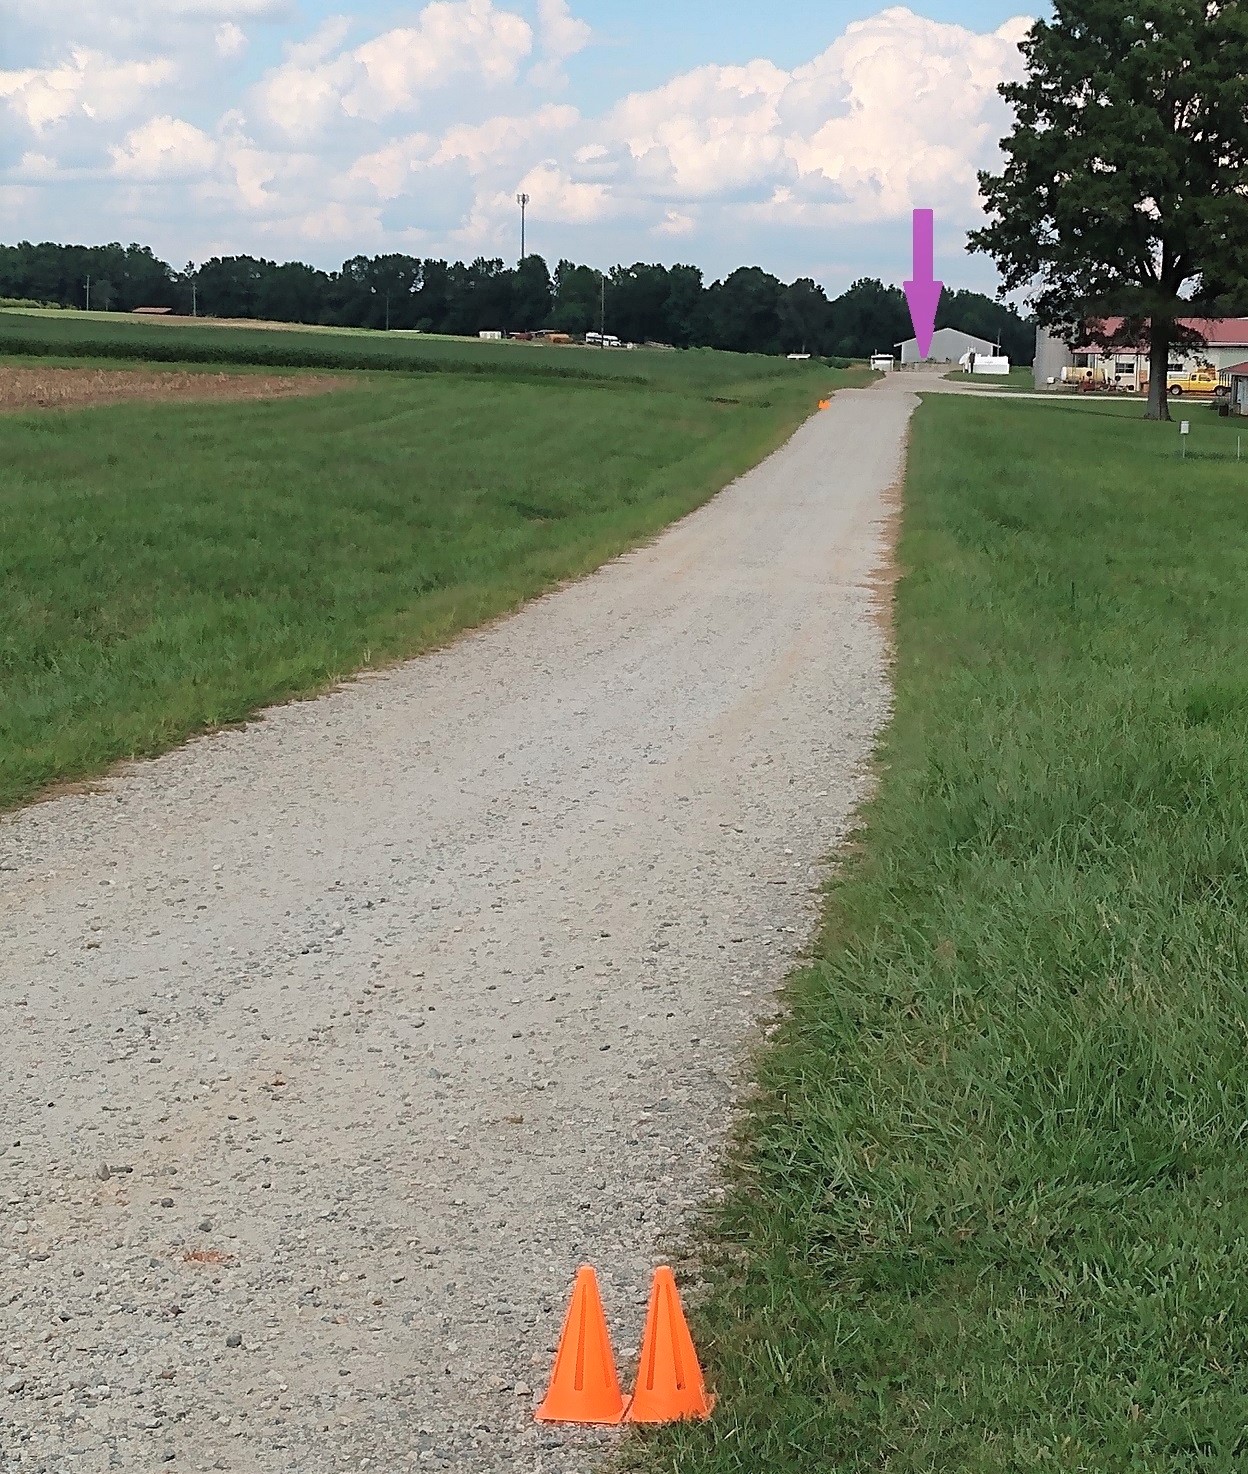 The beginning portion of the agricultural road used in the lab. These two sets of cones are at 0.1 and 0.2 miles from a gray wall (point of arrow in the distance, where a car is parked during the lab).